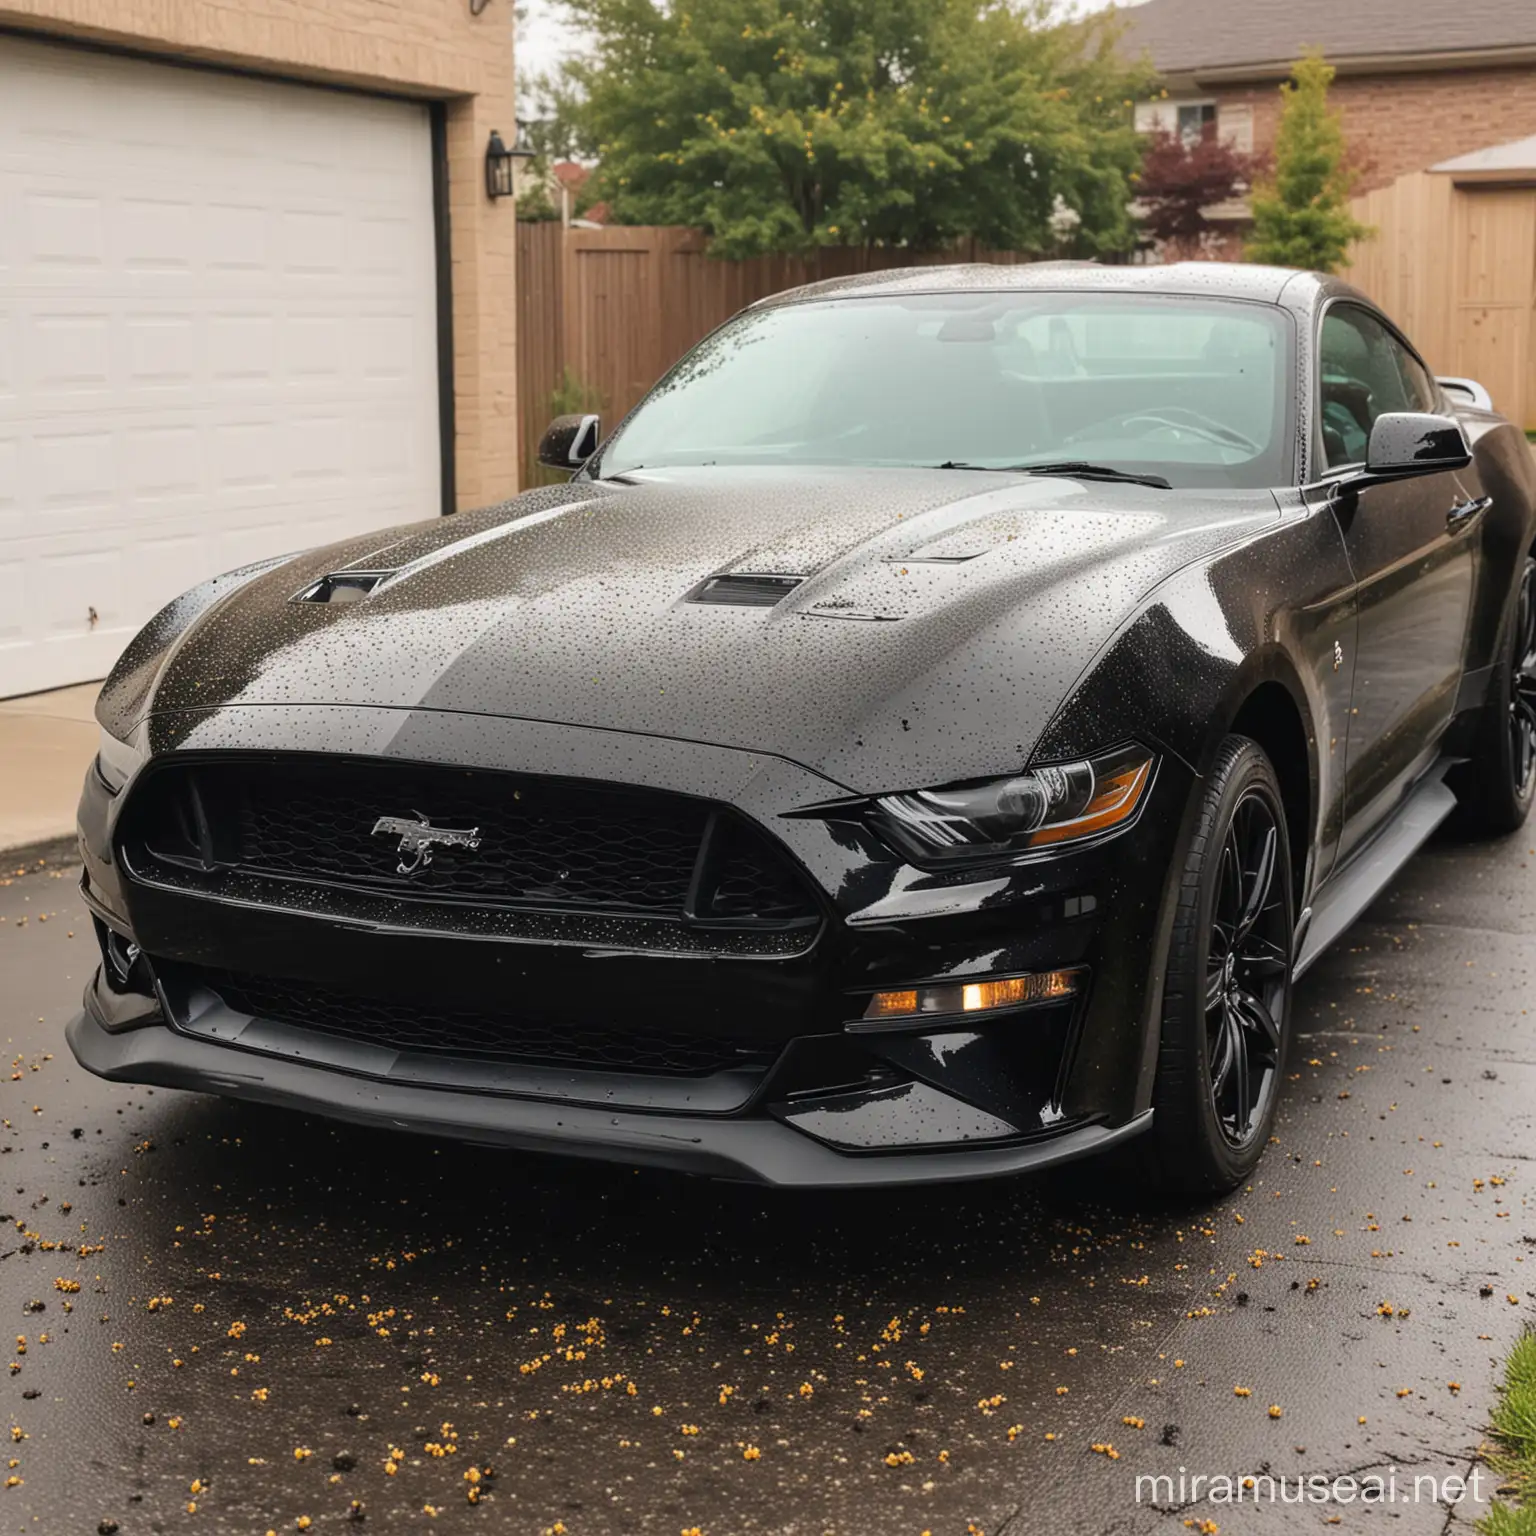 Black Ford Mustang Car Covered in Pollen Driveway Scene